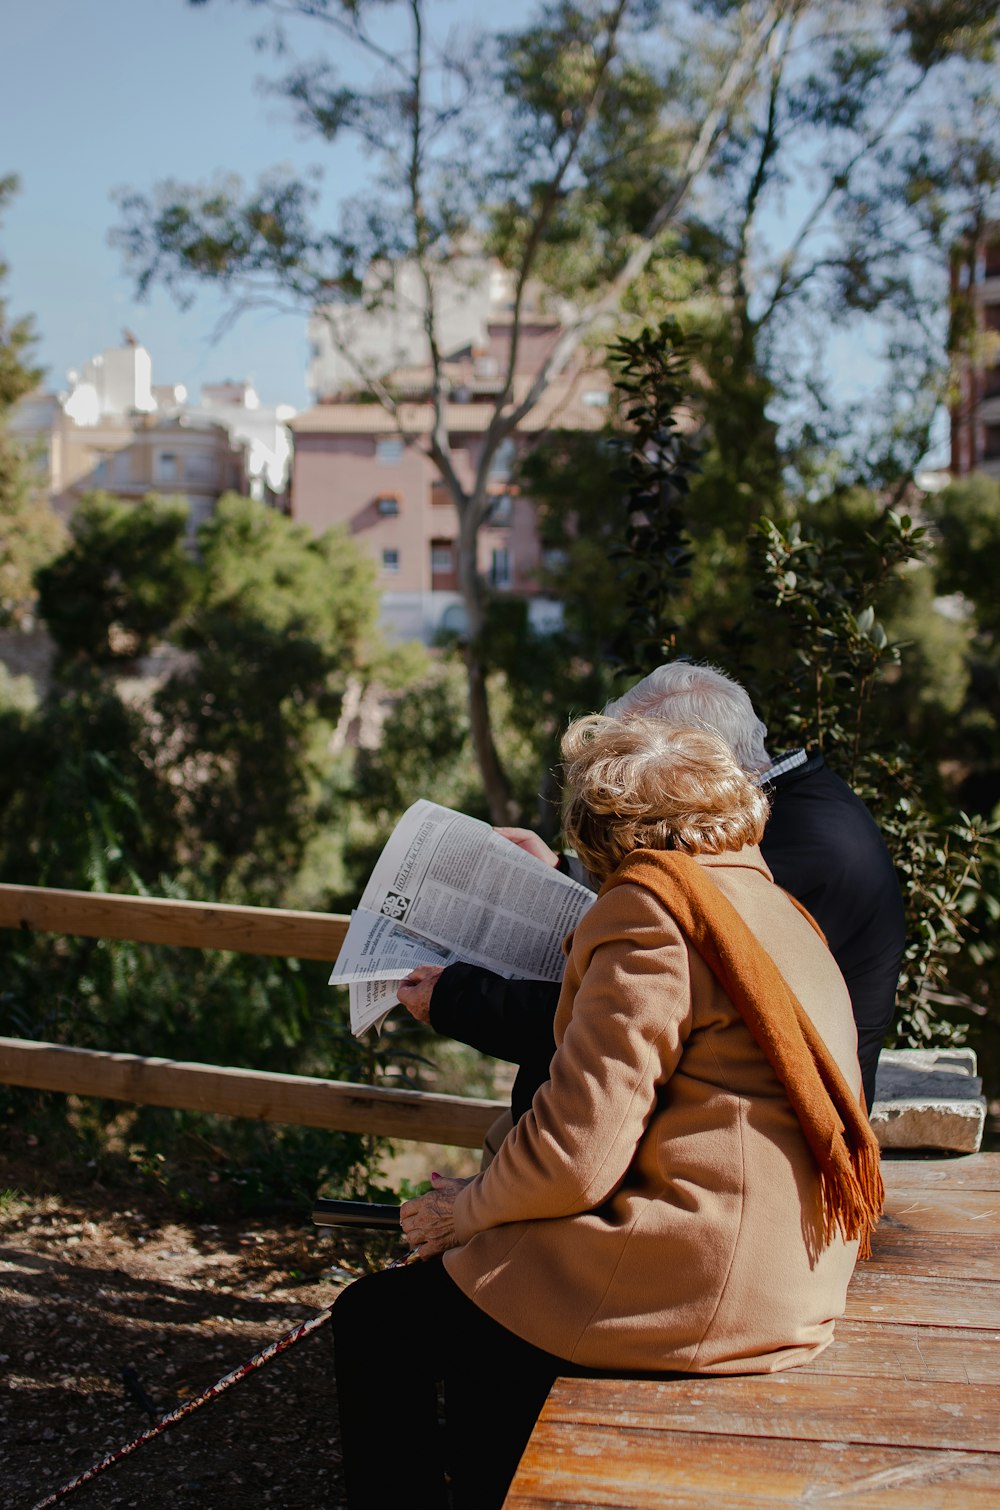 a woman sitting on a bench reading a newspaper